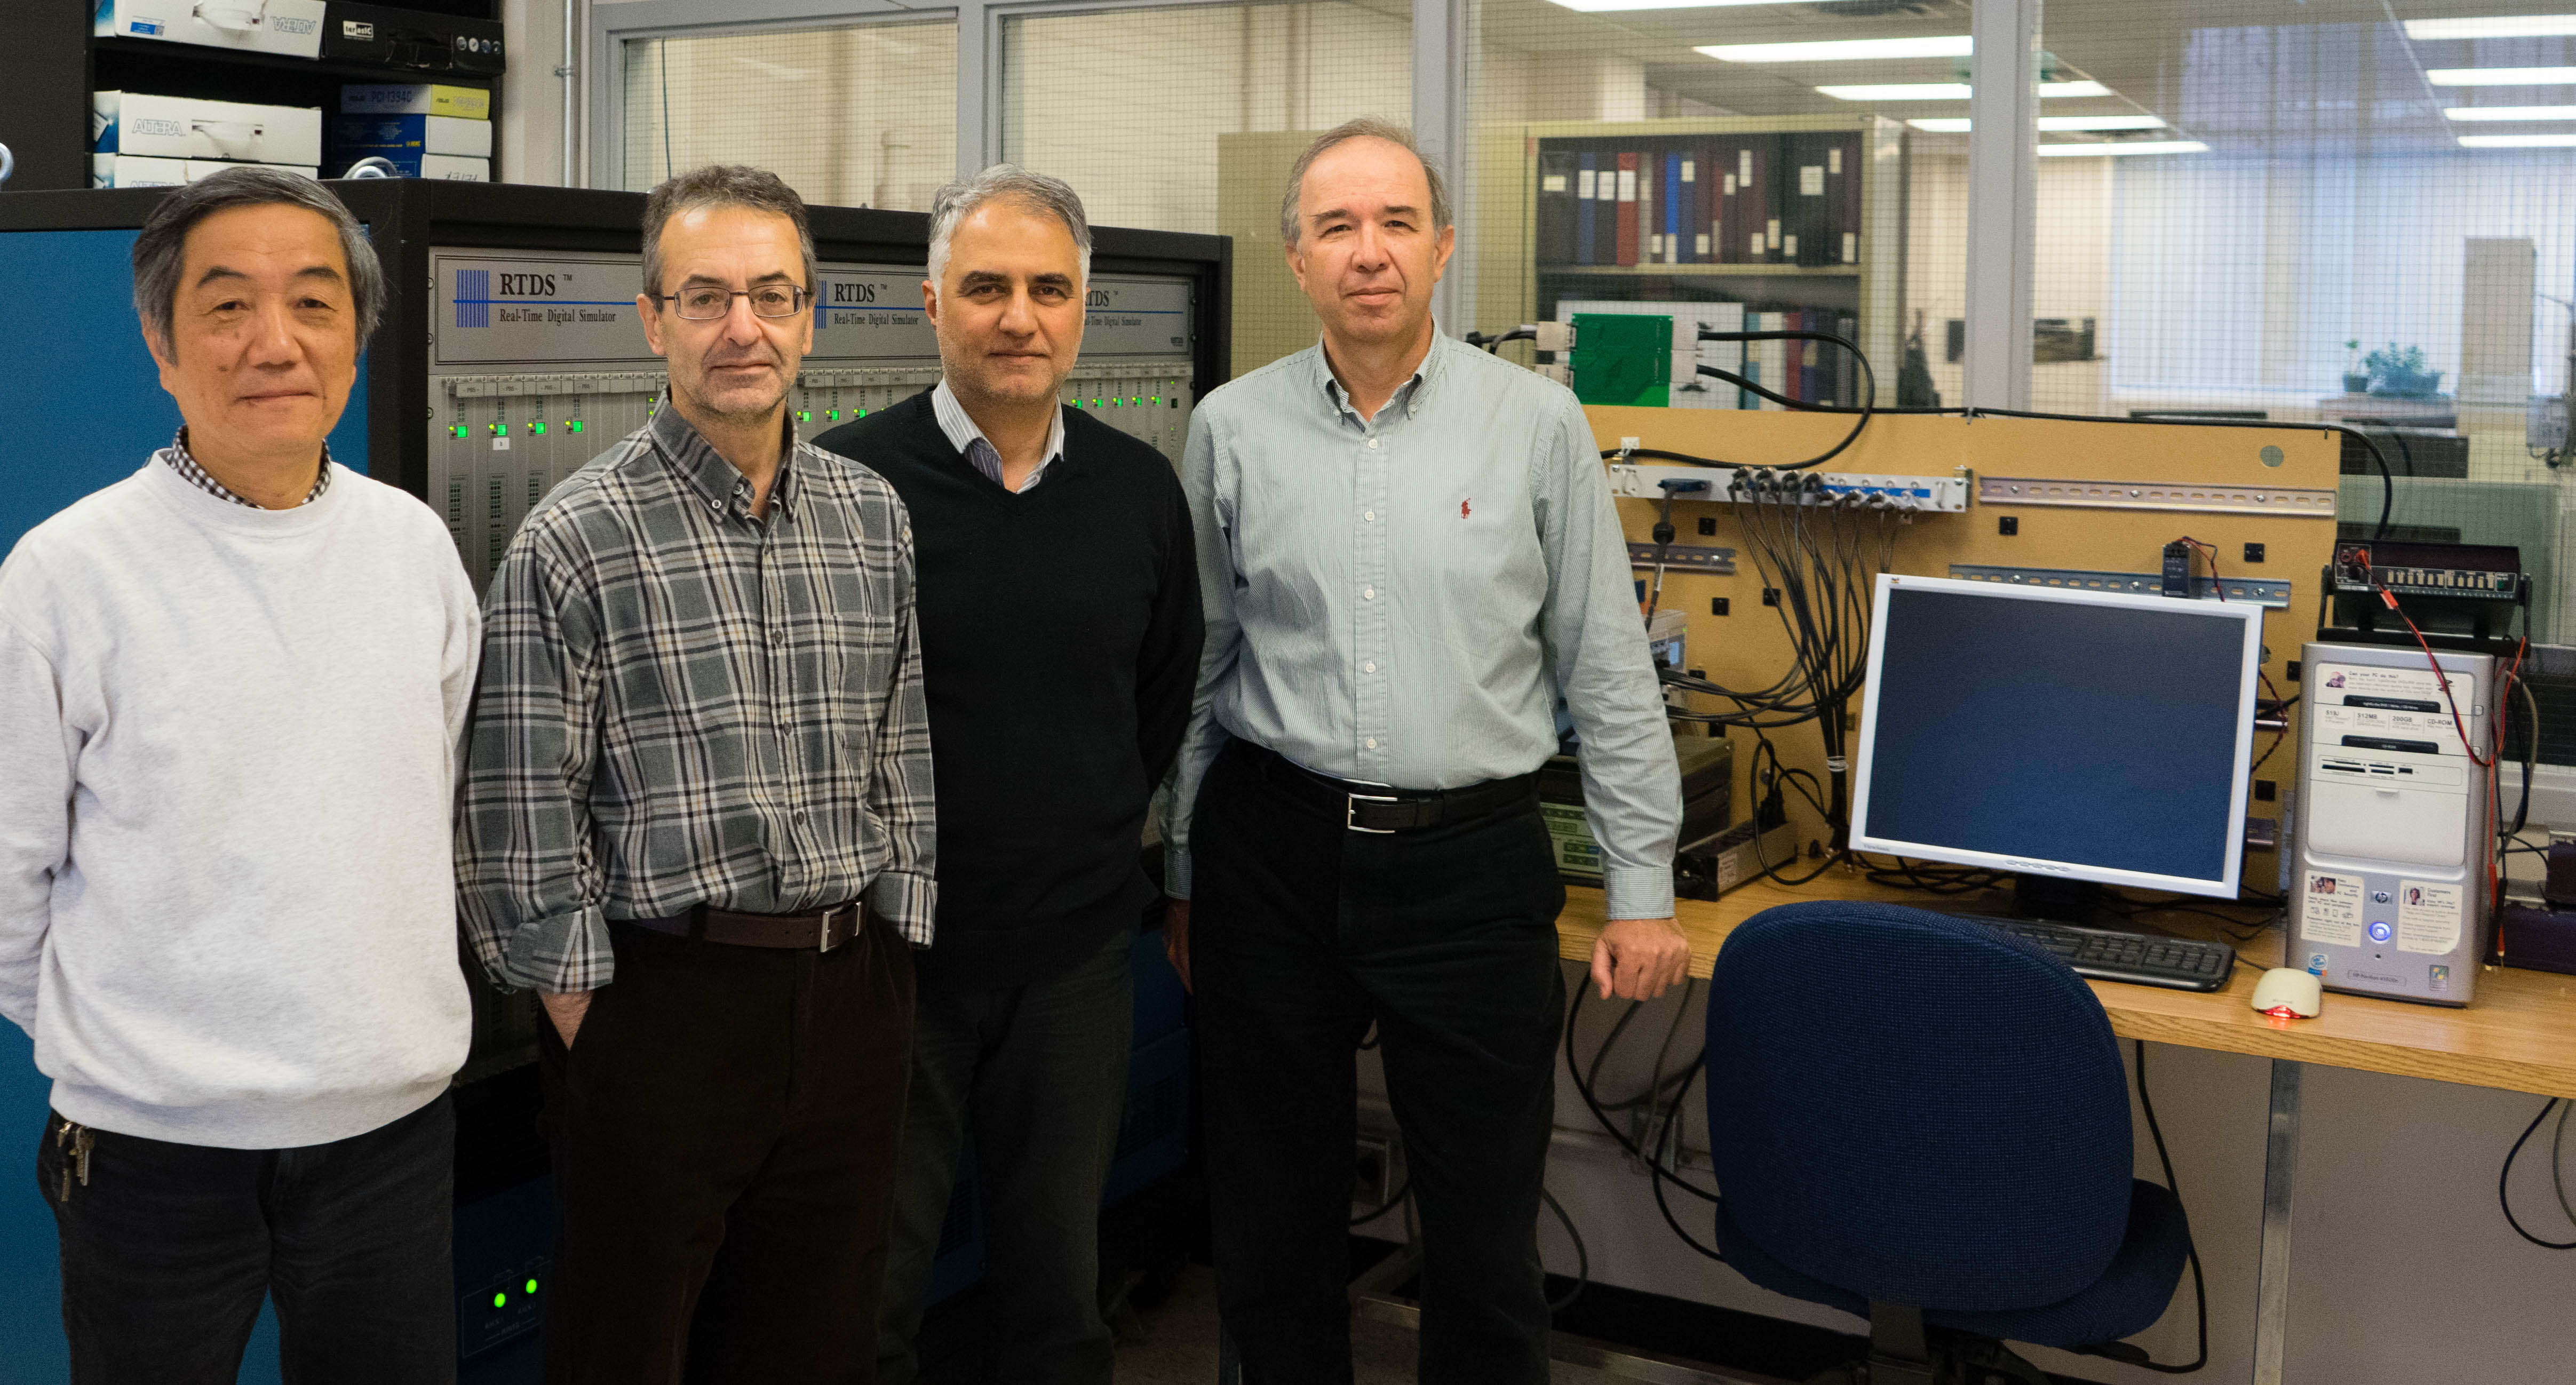 Professor Reza Iravani and members of his research group (from left, Mr. Xiaolin Wang, Professor Reza Iravani, Dr. Ali Nabavi and Dr. Milan Graovac) are helping to reduce range anxiety for electric vehicle drivers (Photo: Jessica MacInnis)
